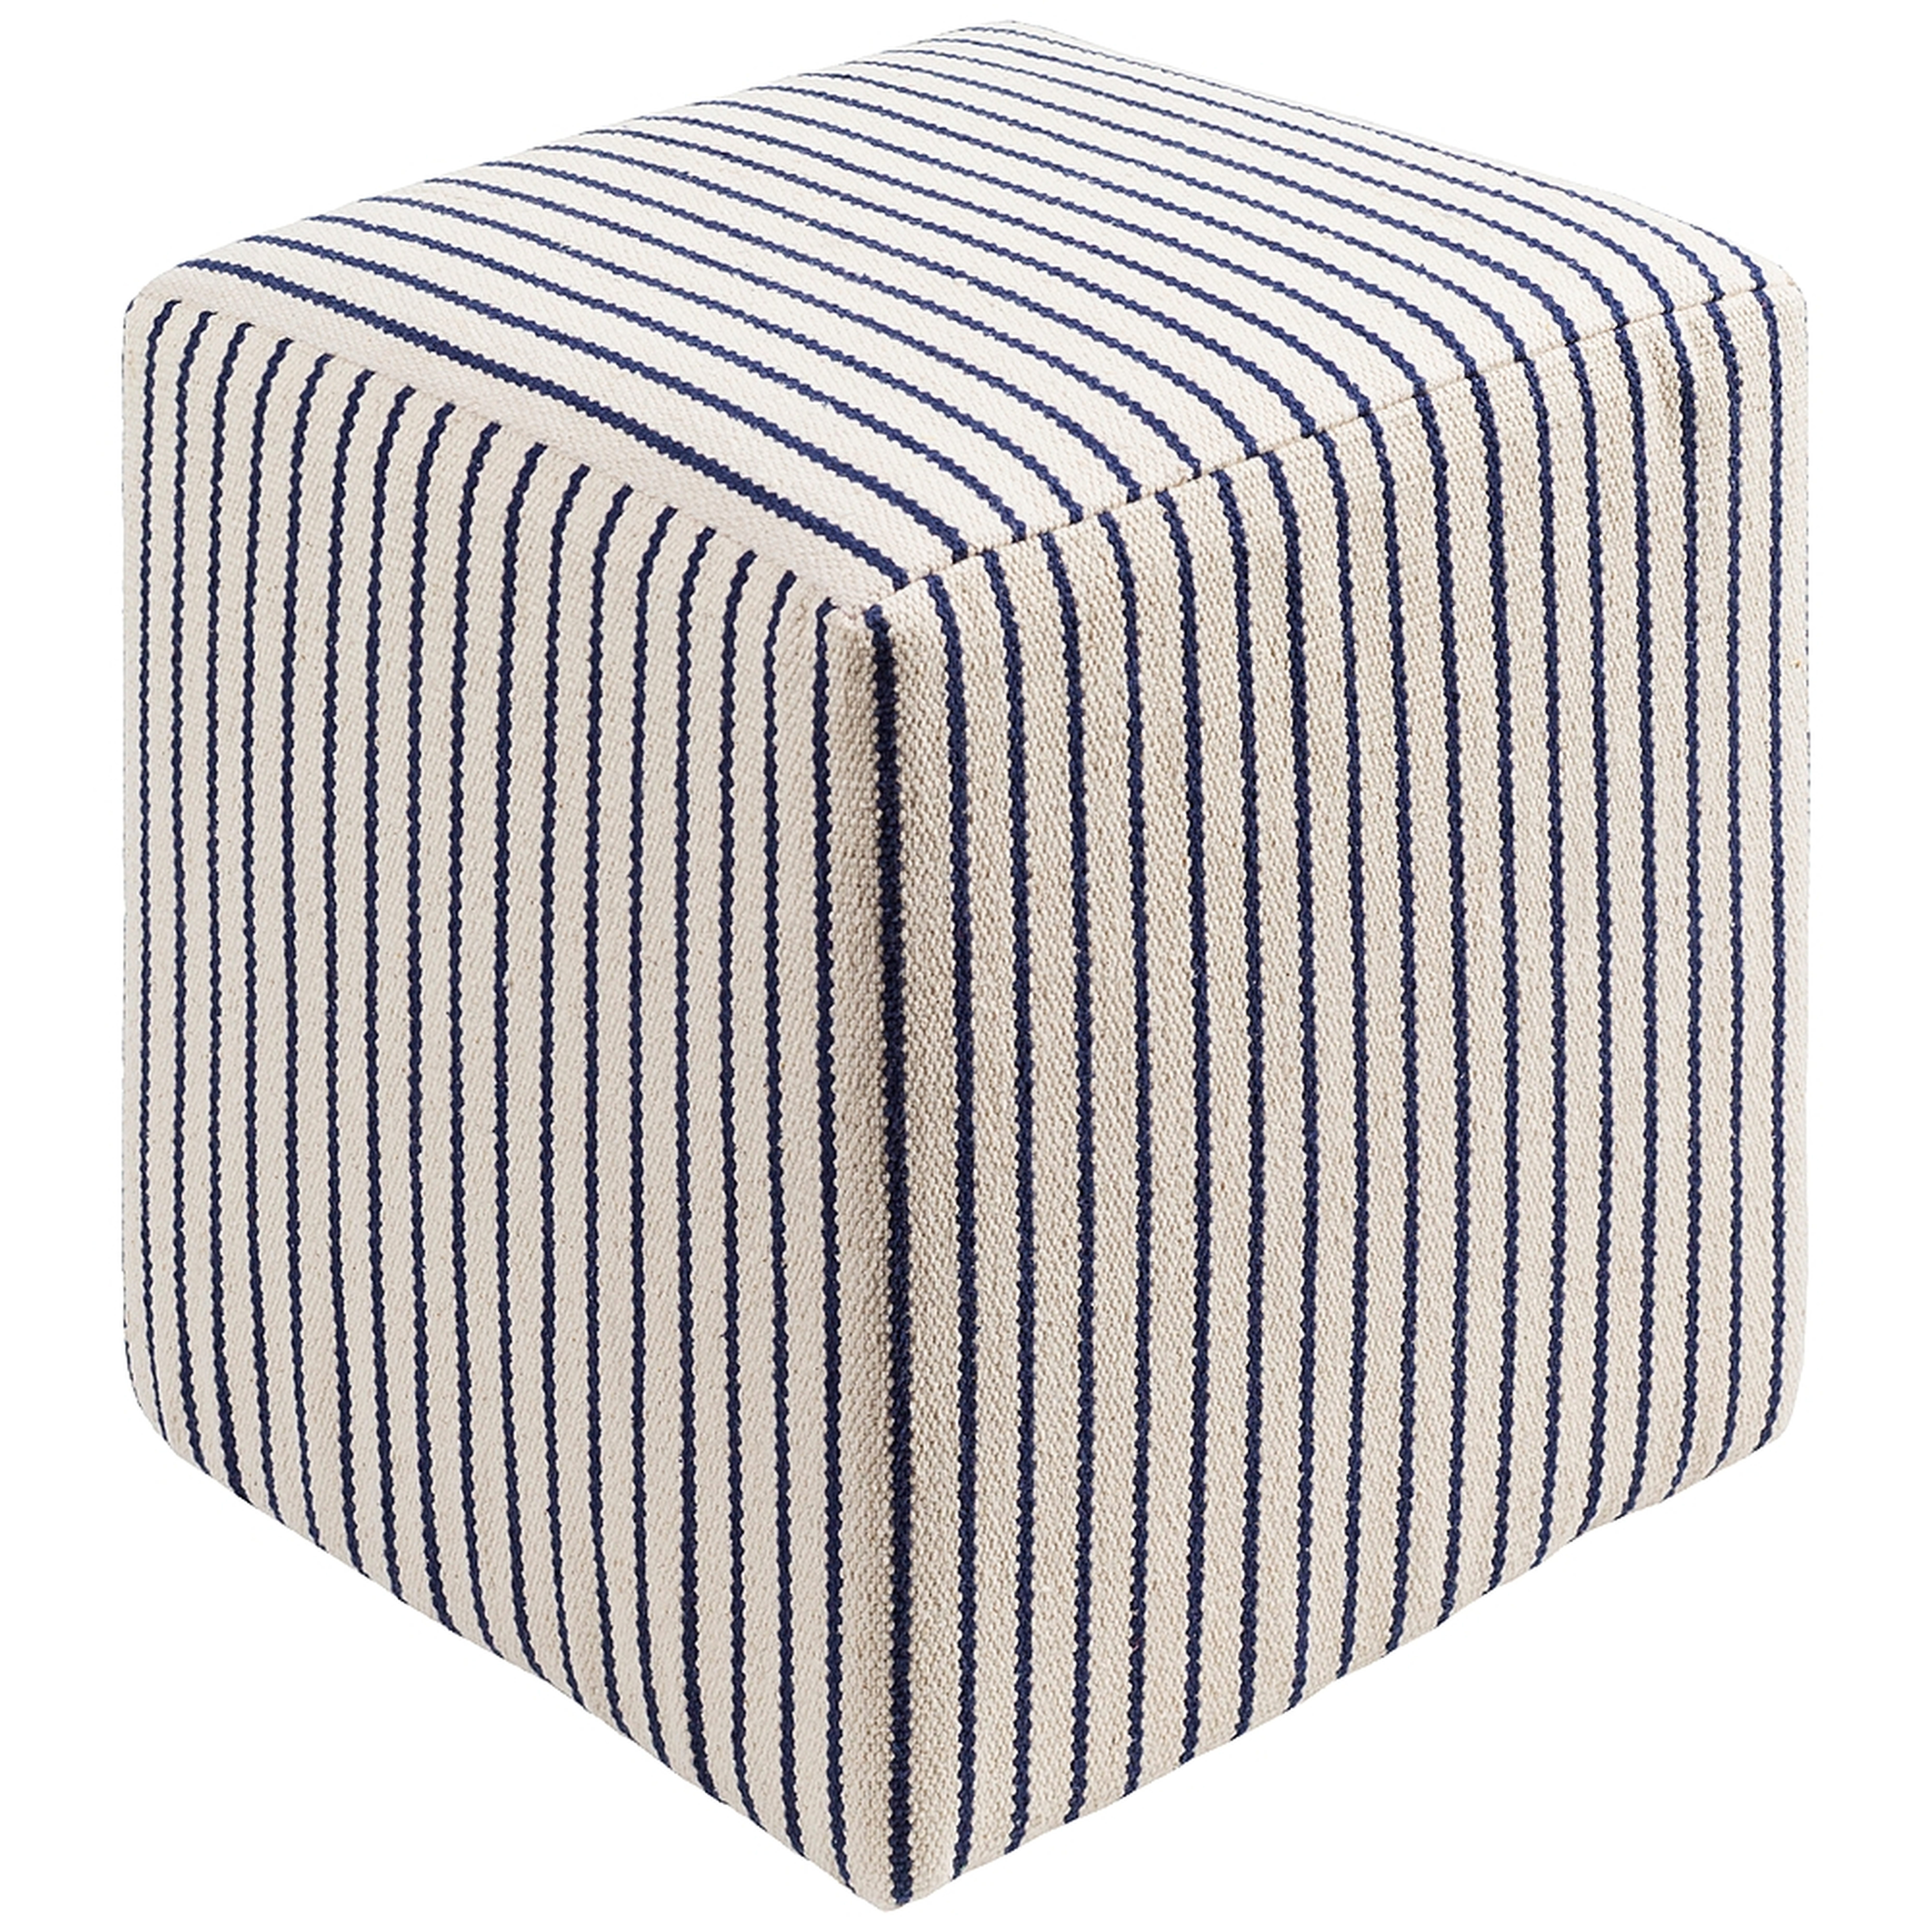 Surya Matchford Cream and Navy Cotton Woven Pouf Ottoman - Style # 91H75 - Lamps Plus